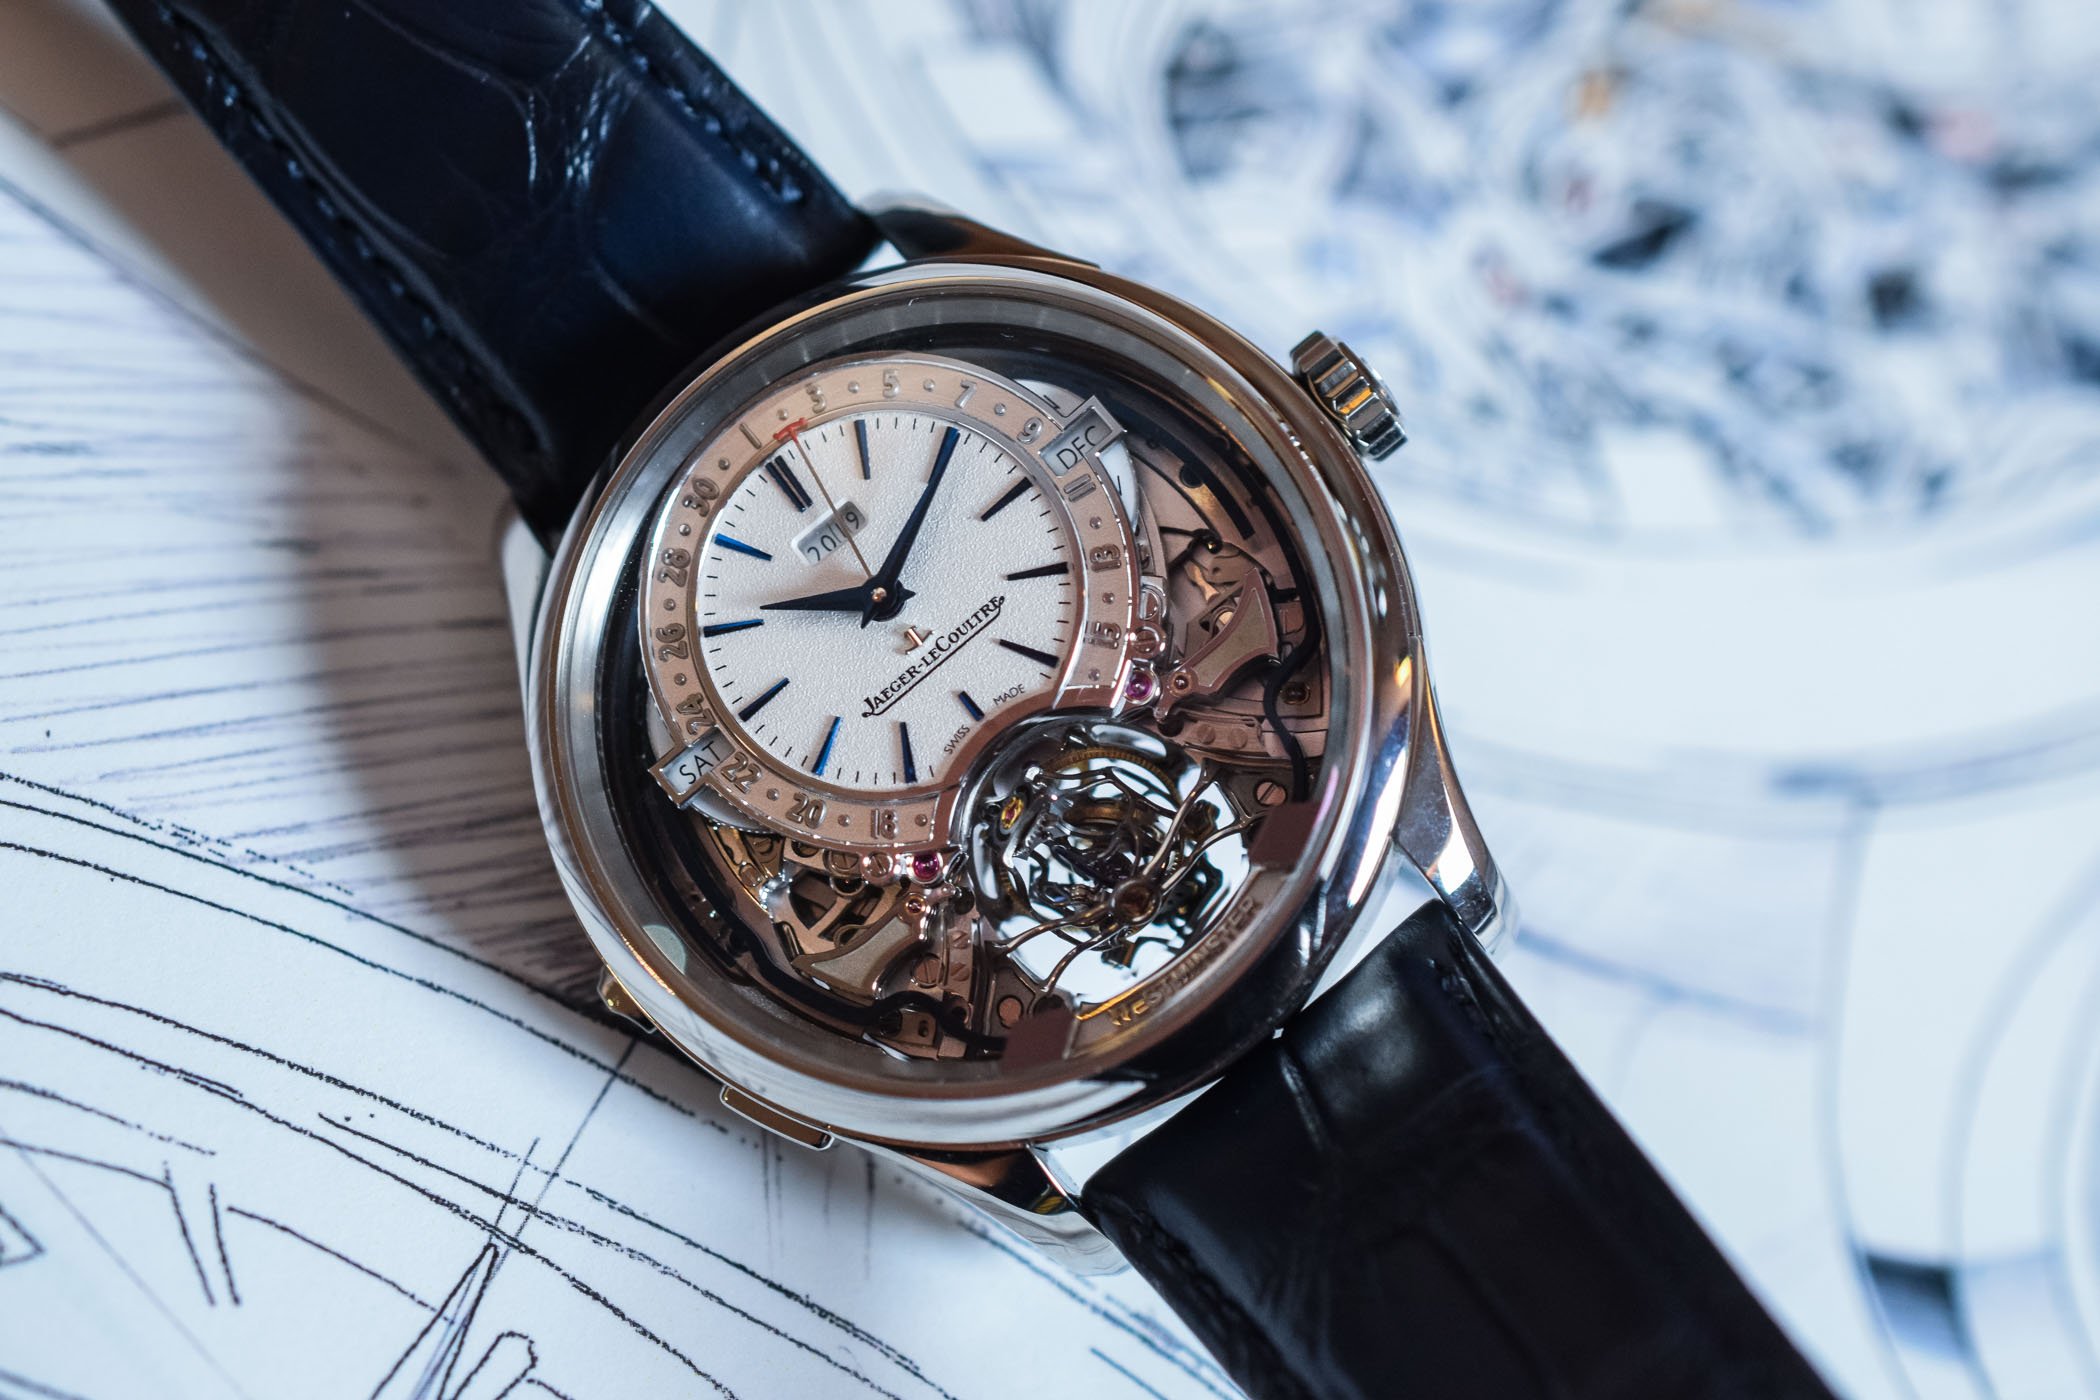 Jaeger LeCoultre SIHH 2019 - 5